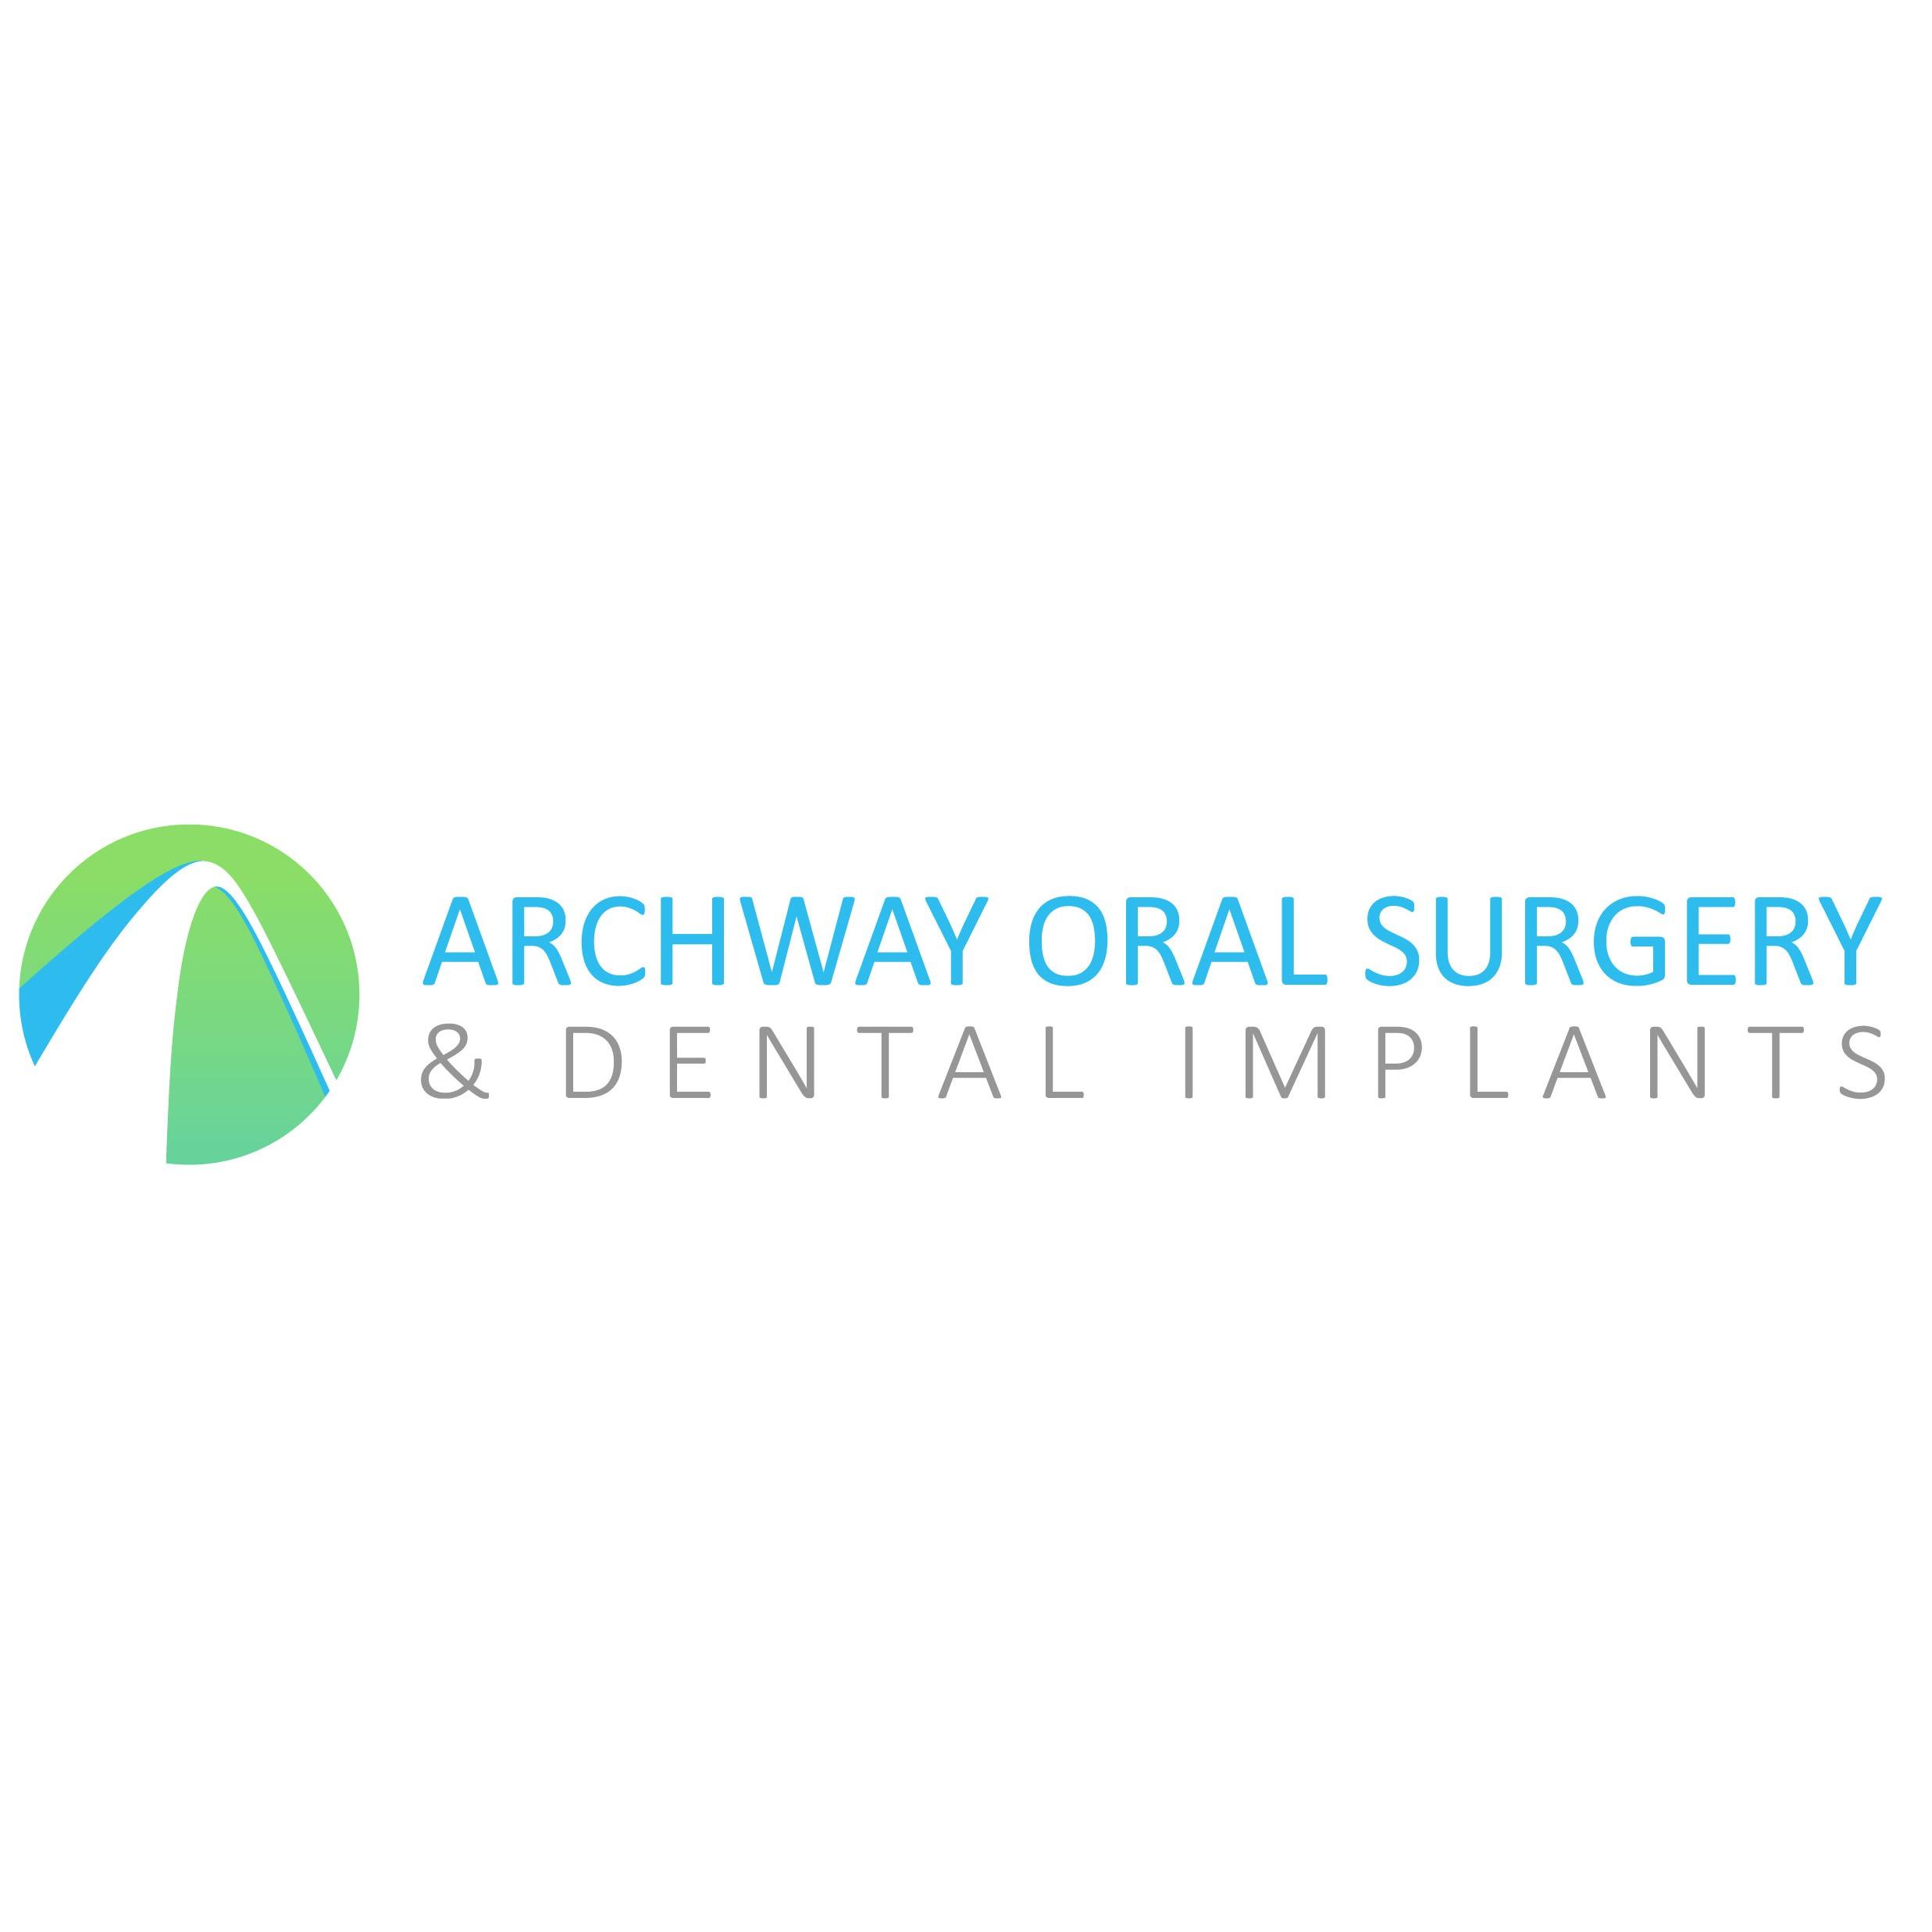 Archway Oral Surgery and Dental Implants Logo